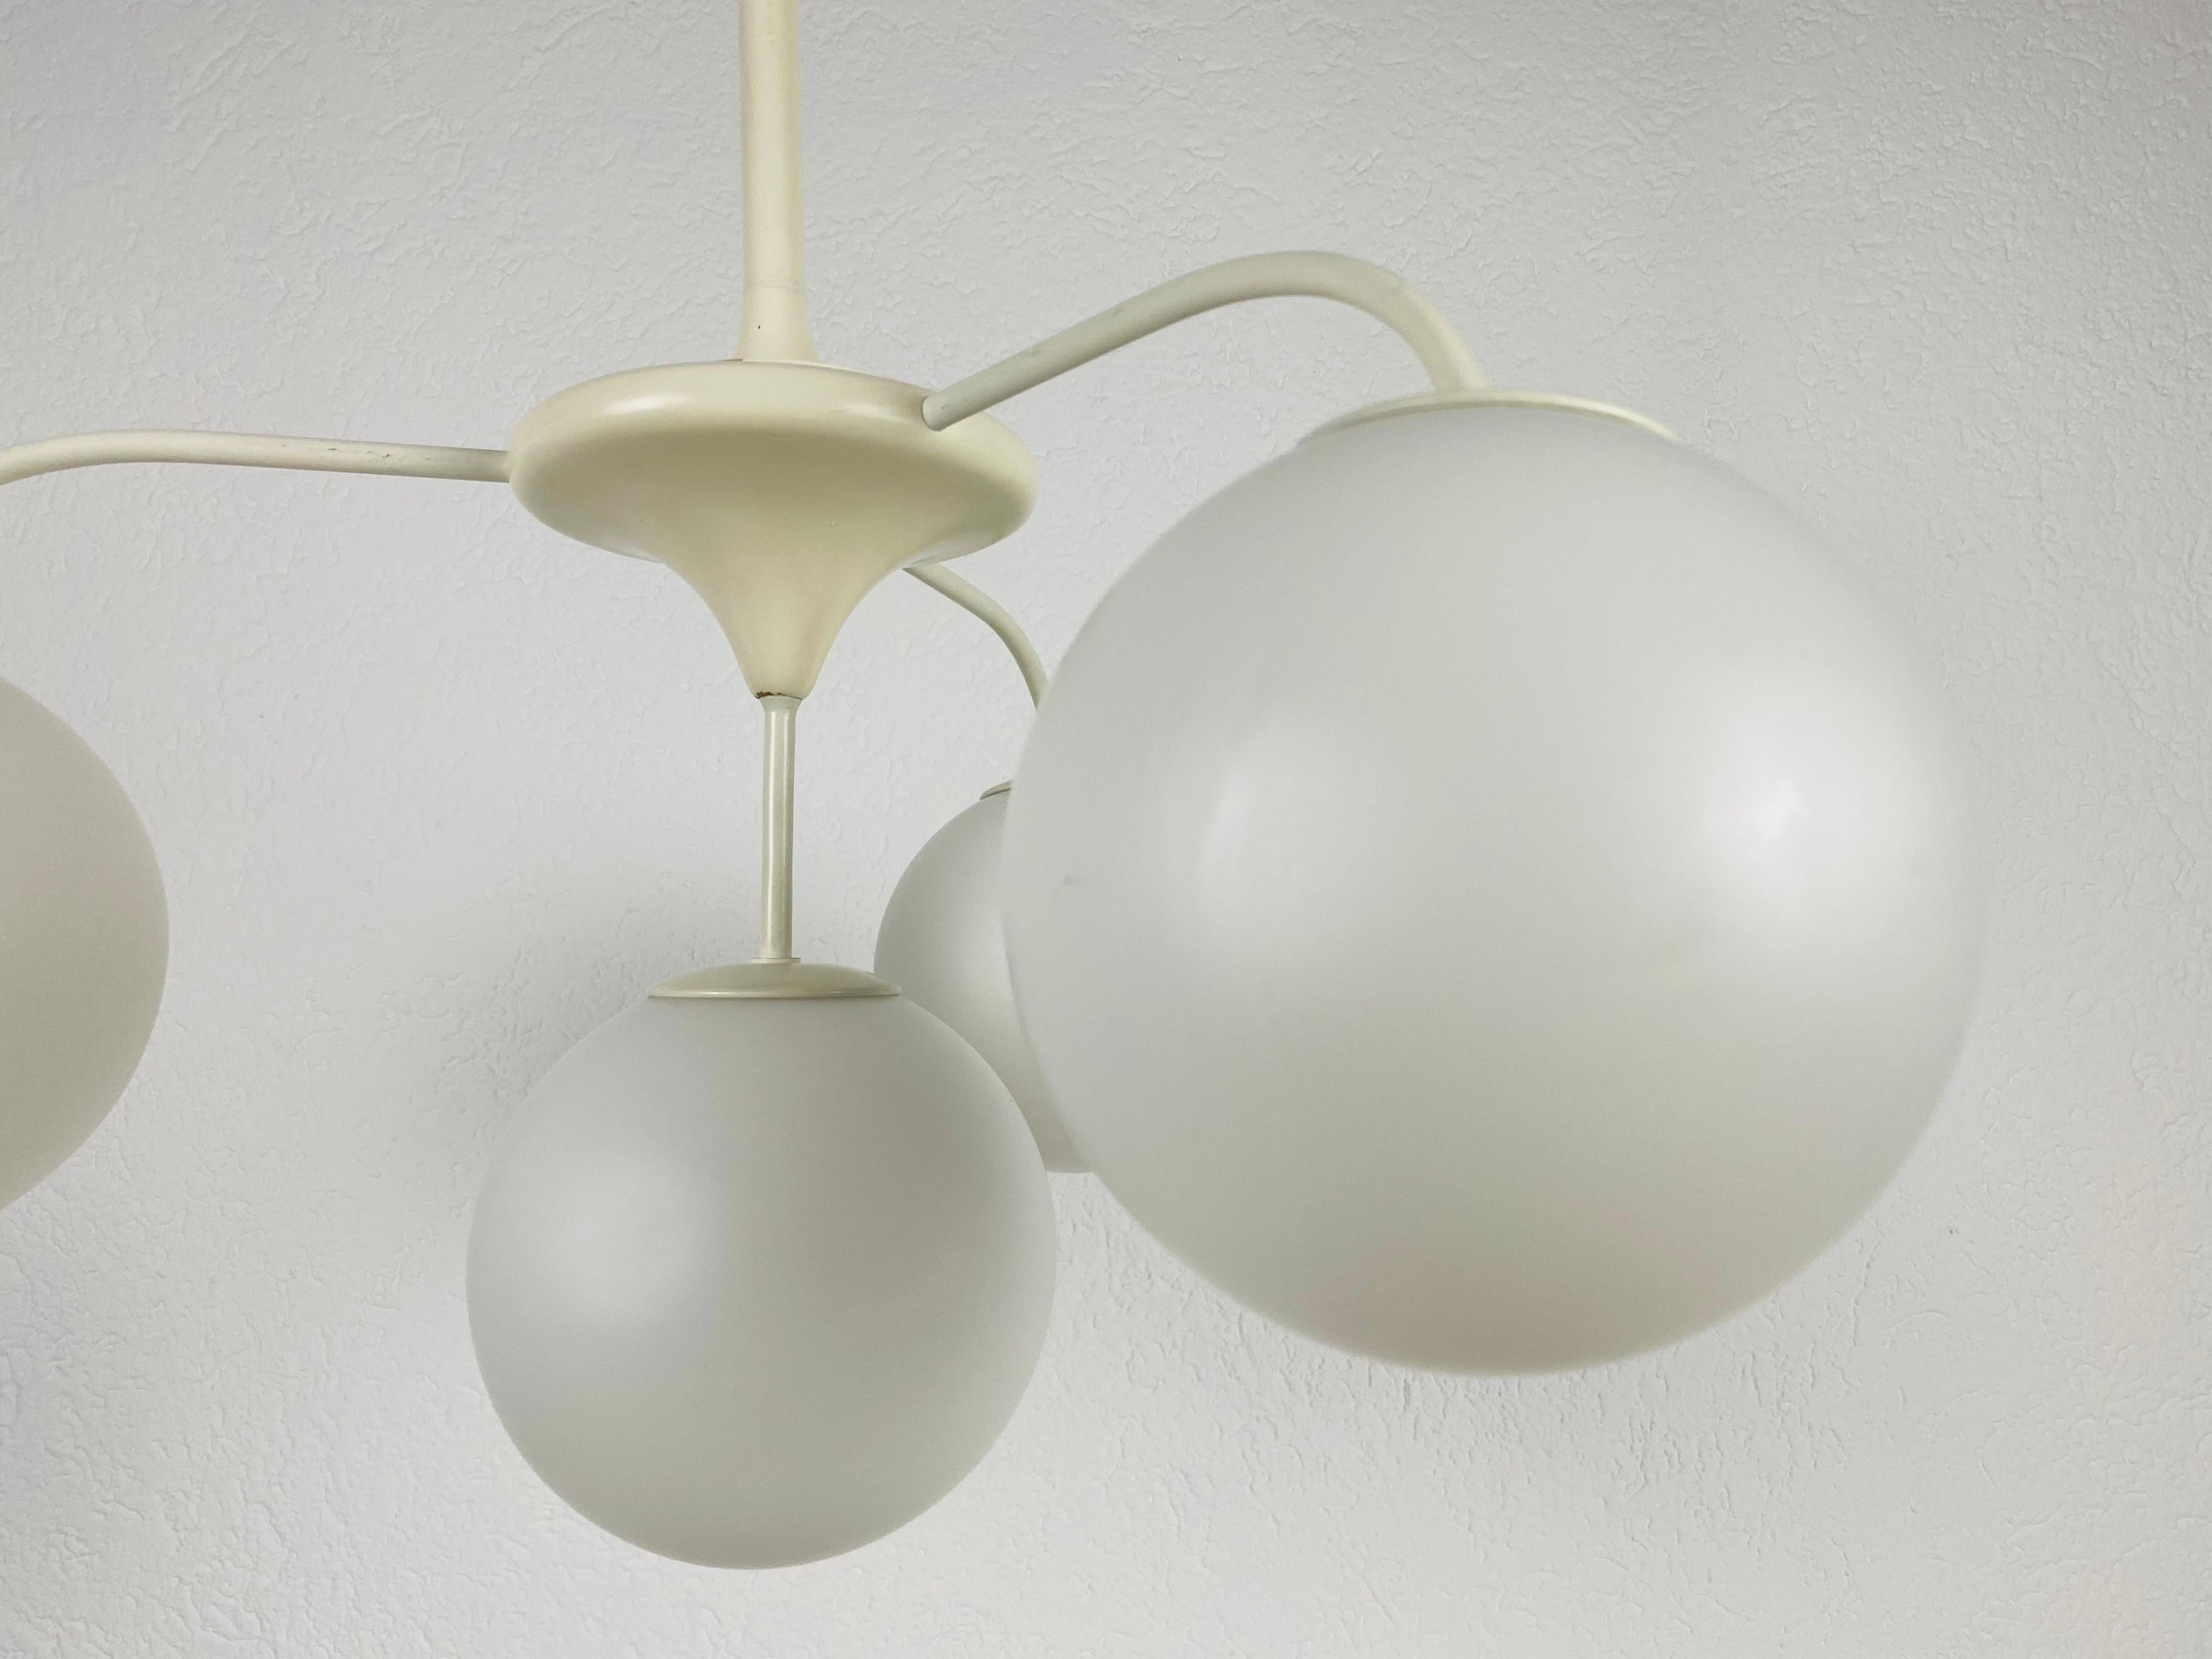 German Midcentury White 4-Arm Space Age Chandelier by Max Bill for Temde 1960s